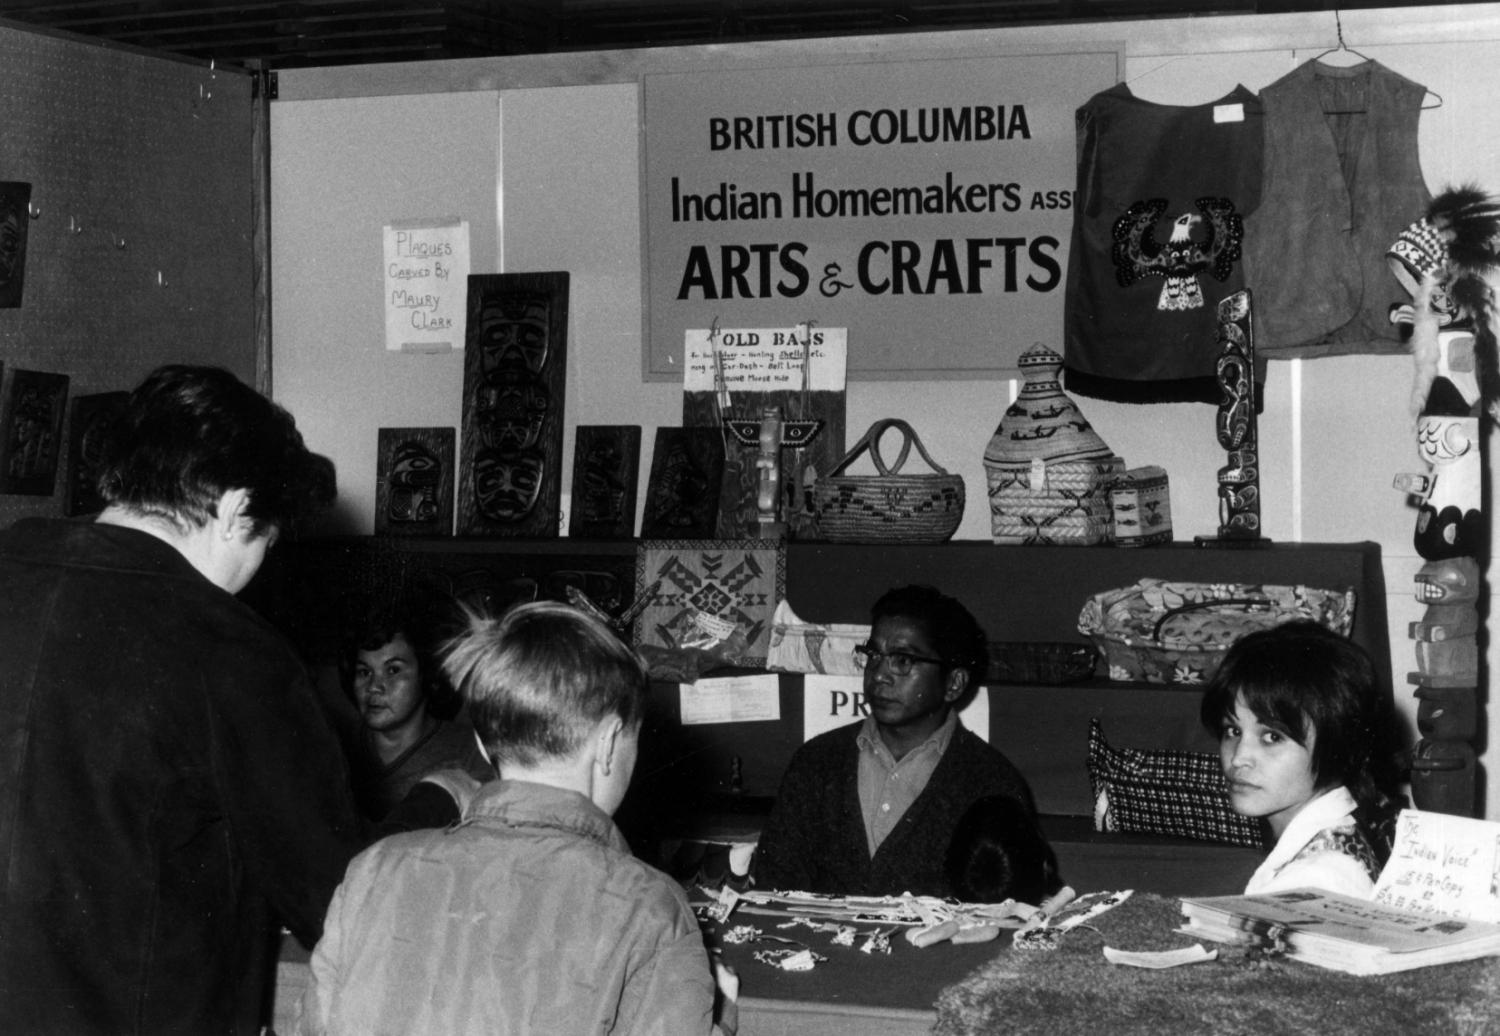 British Columbia Indian Homemakers Association display of arts and crafts in 1970 at the PNE.